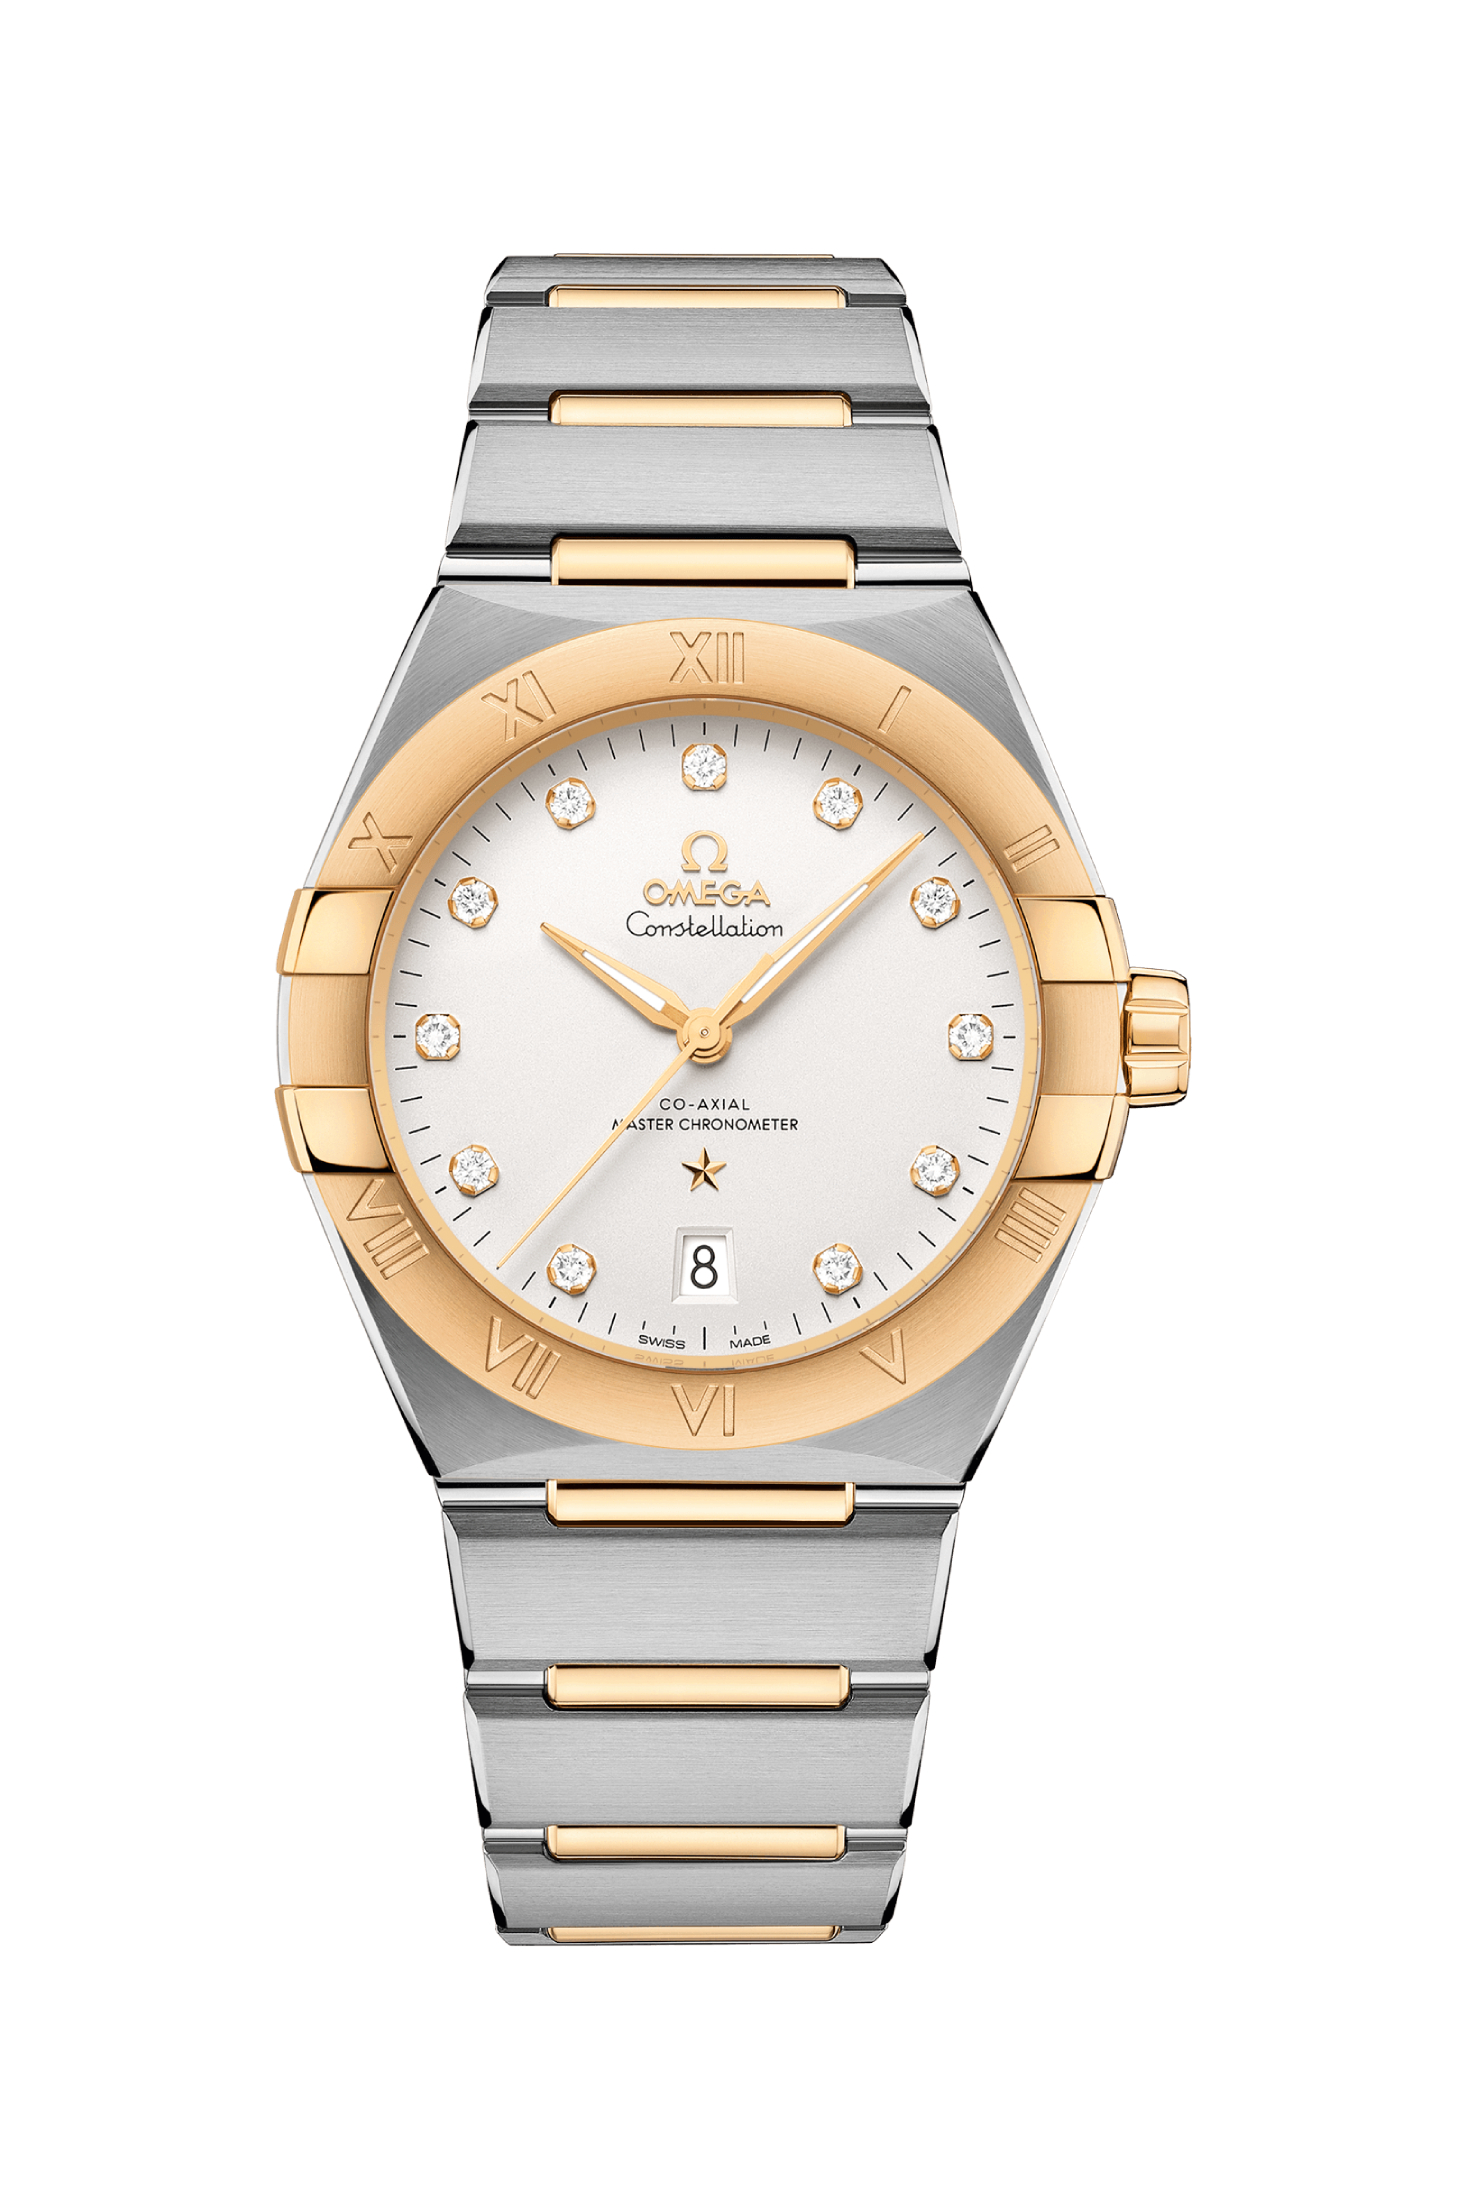 Men's watch / unisex  OMEGA, Constellation Co Axial Master Chronometer / 39mm, SKU: 131.20.39.20.52.002 | watchapproach.com